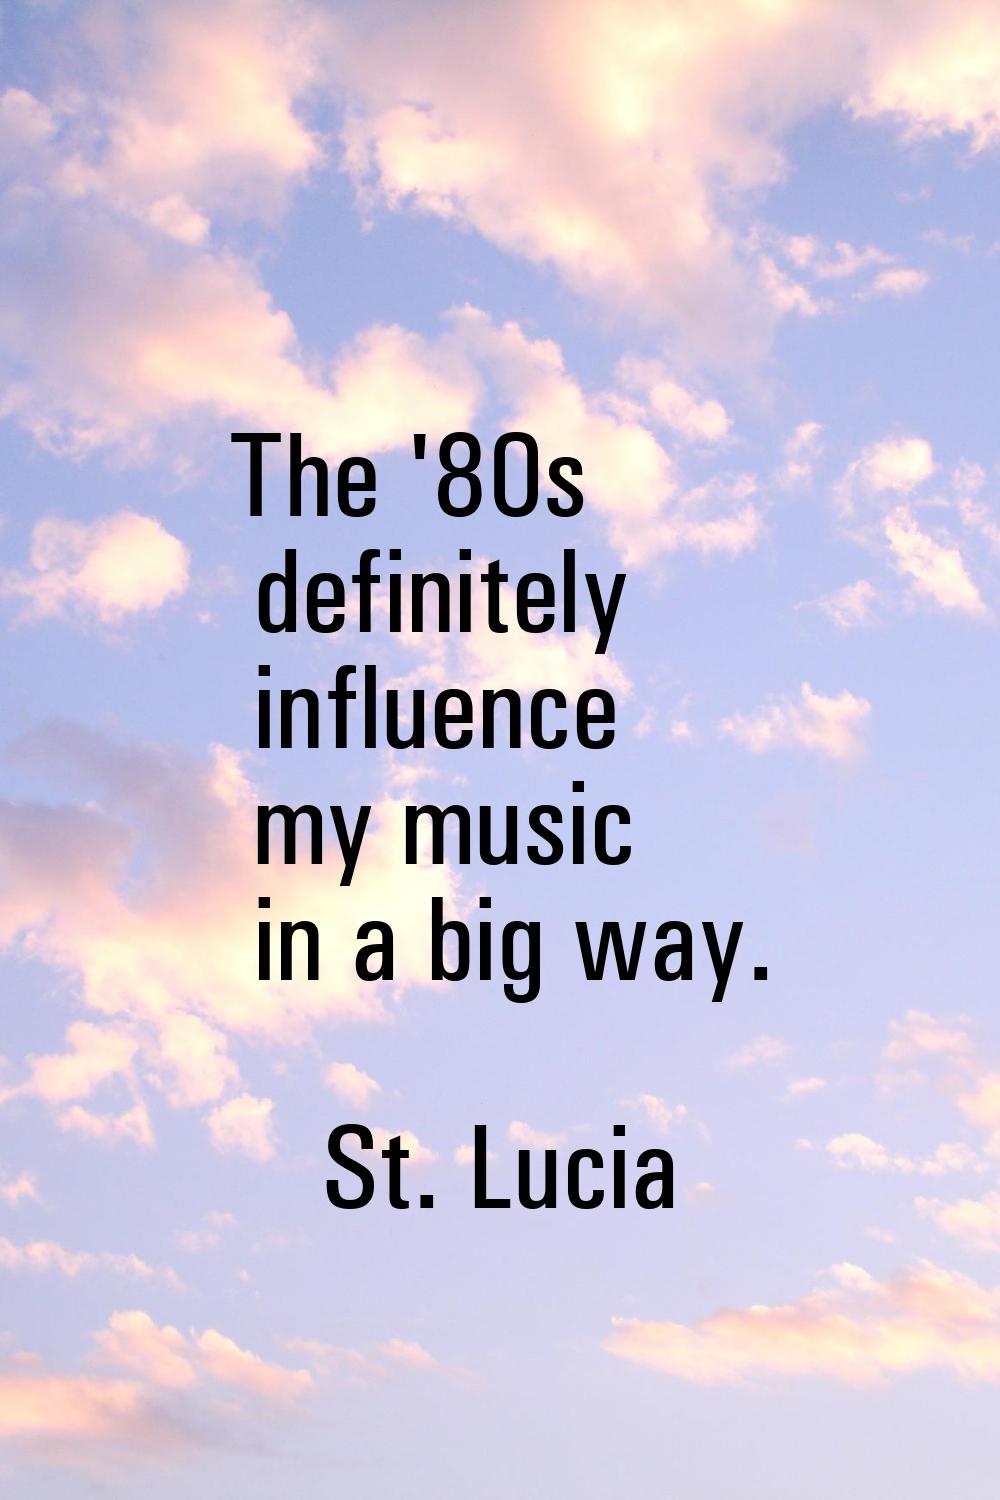 The '80s definitely influence my music in a big way.